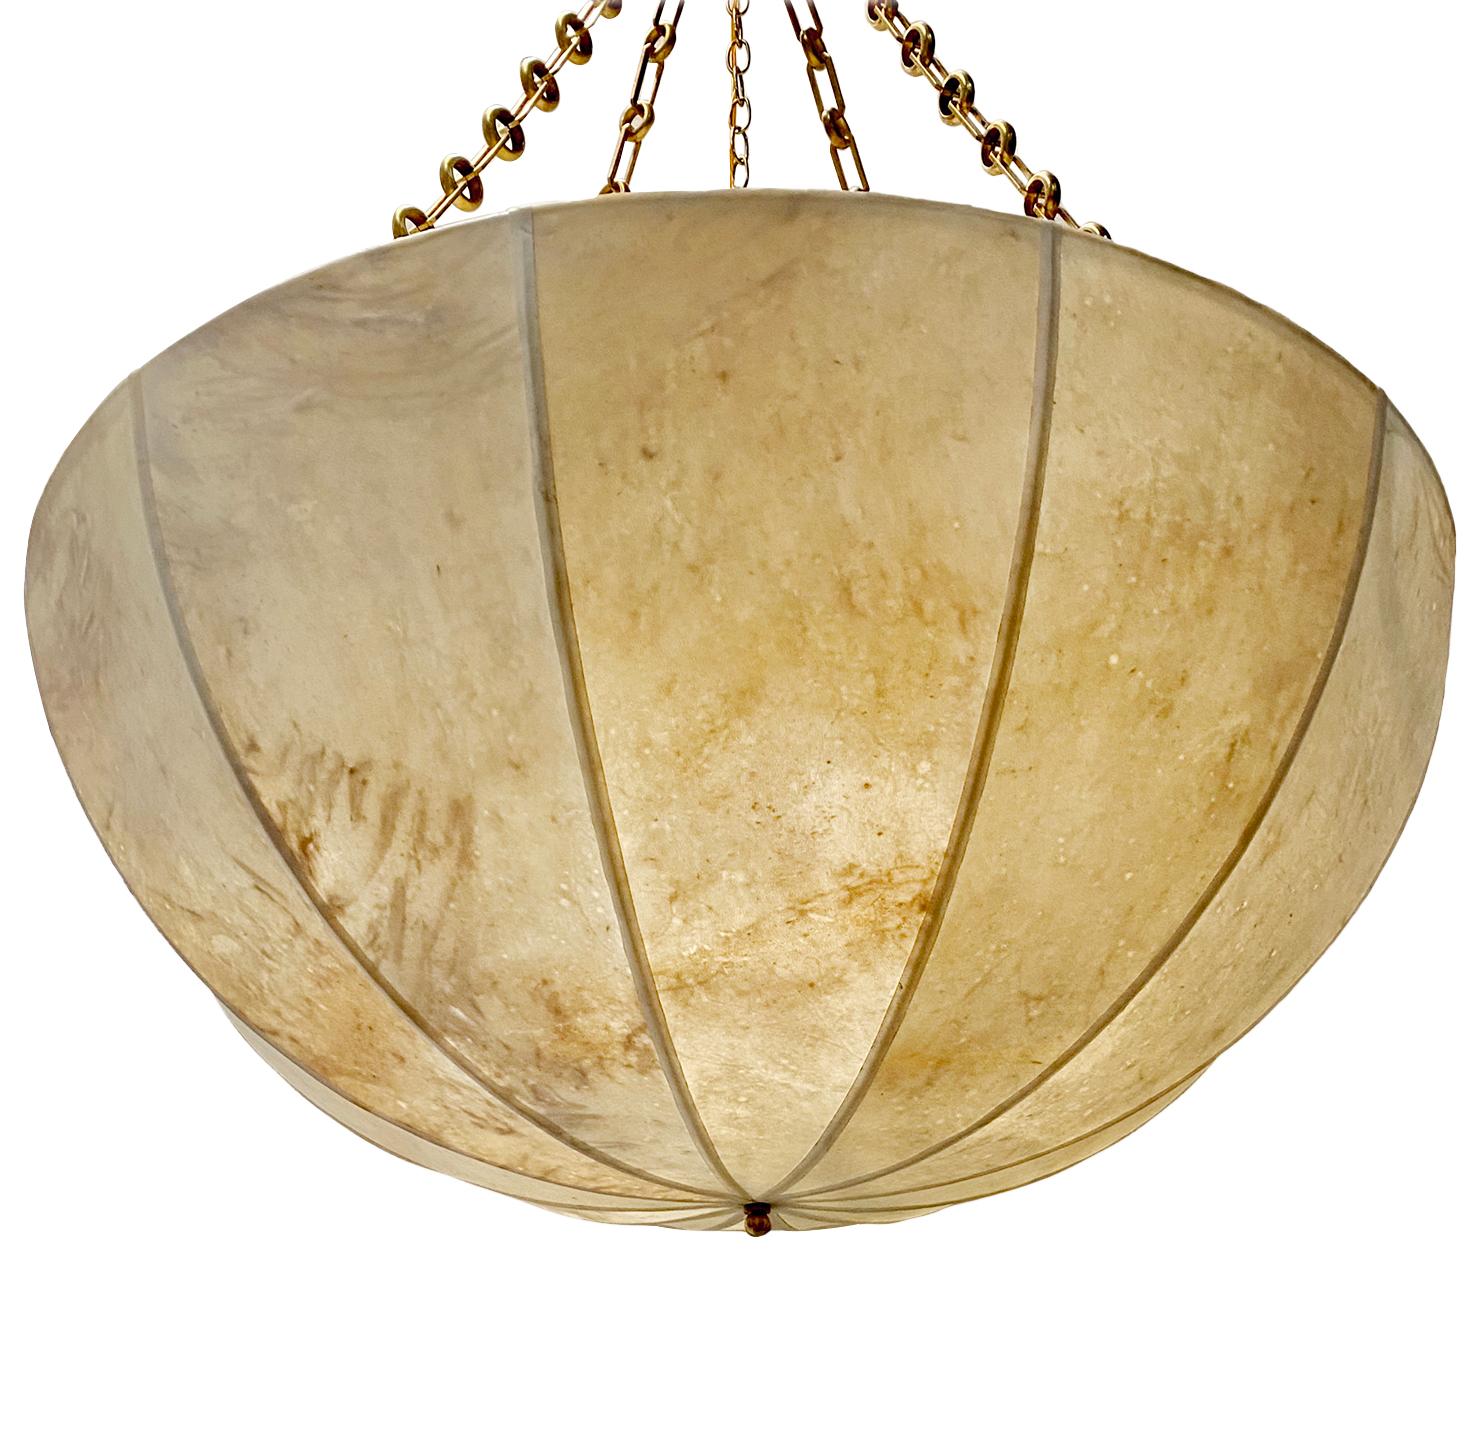 A circa 1980's Italian hand made parchment light fixture with 10 interior lights.

Measurements:
Drop: 48